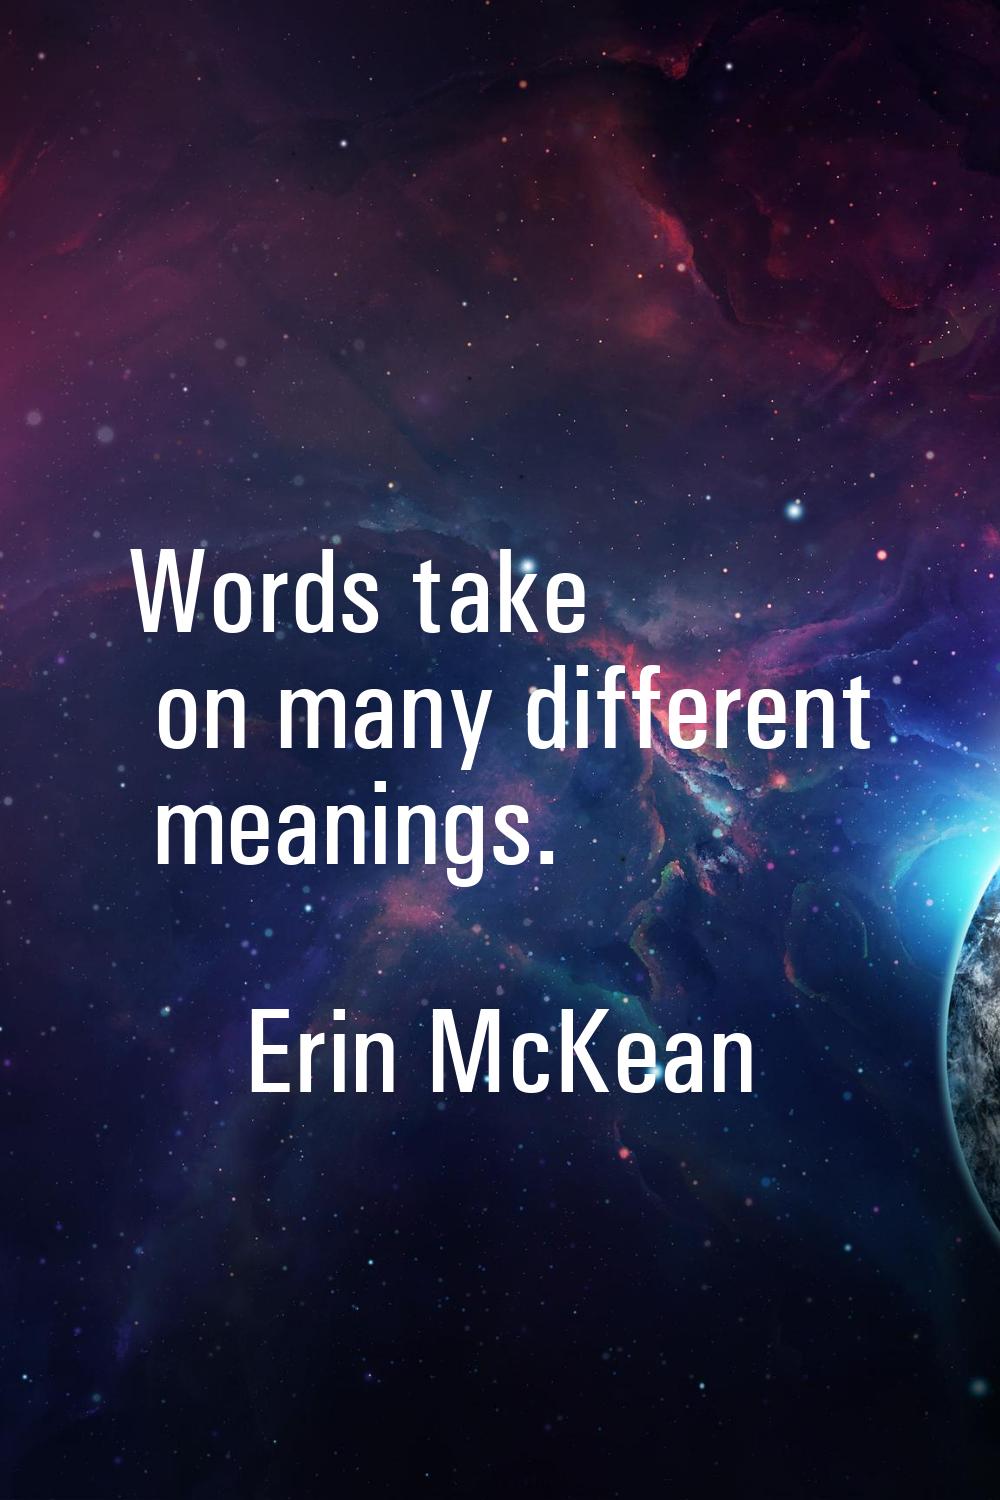 Words take on many different meanings.